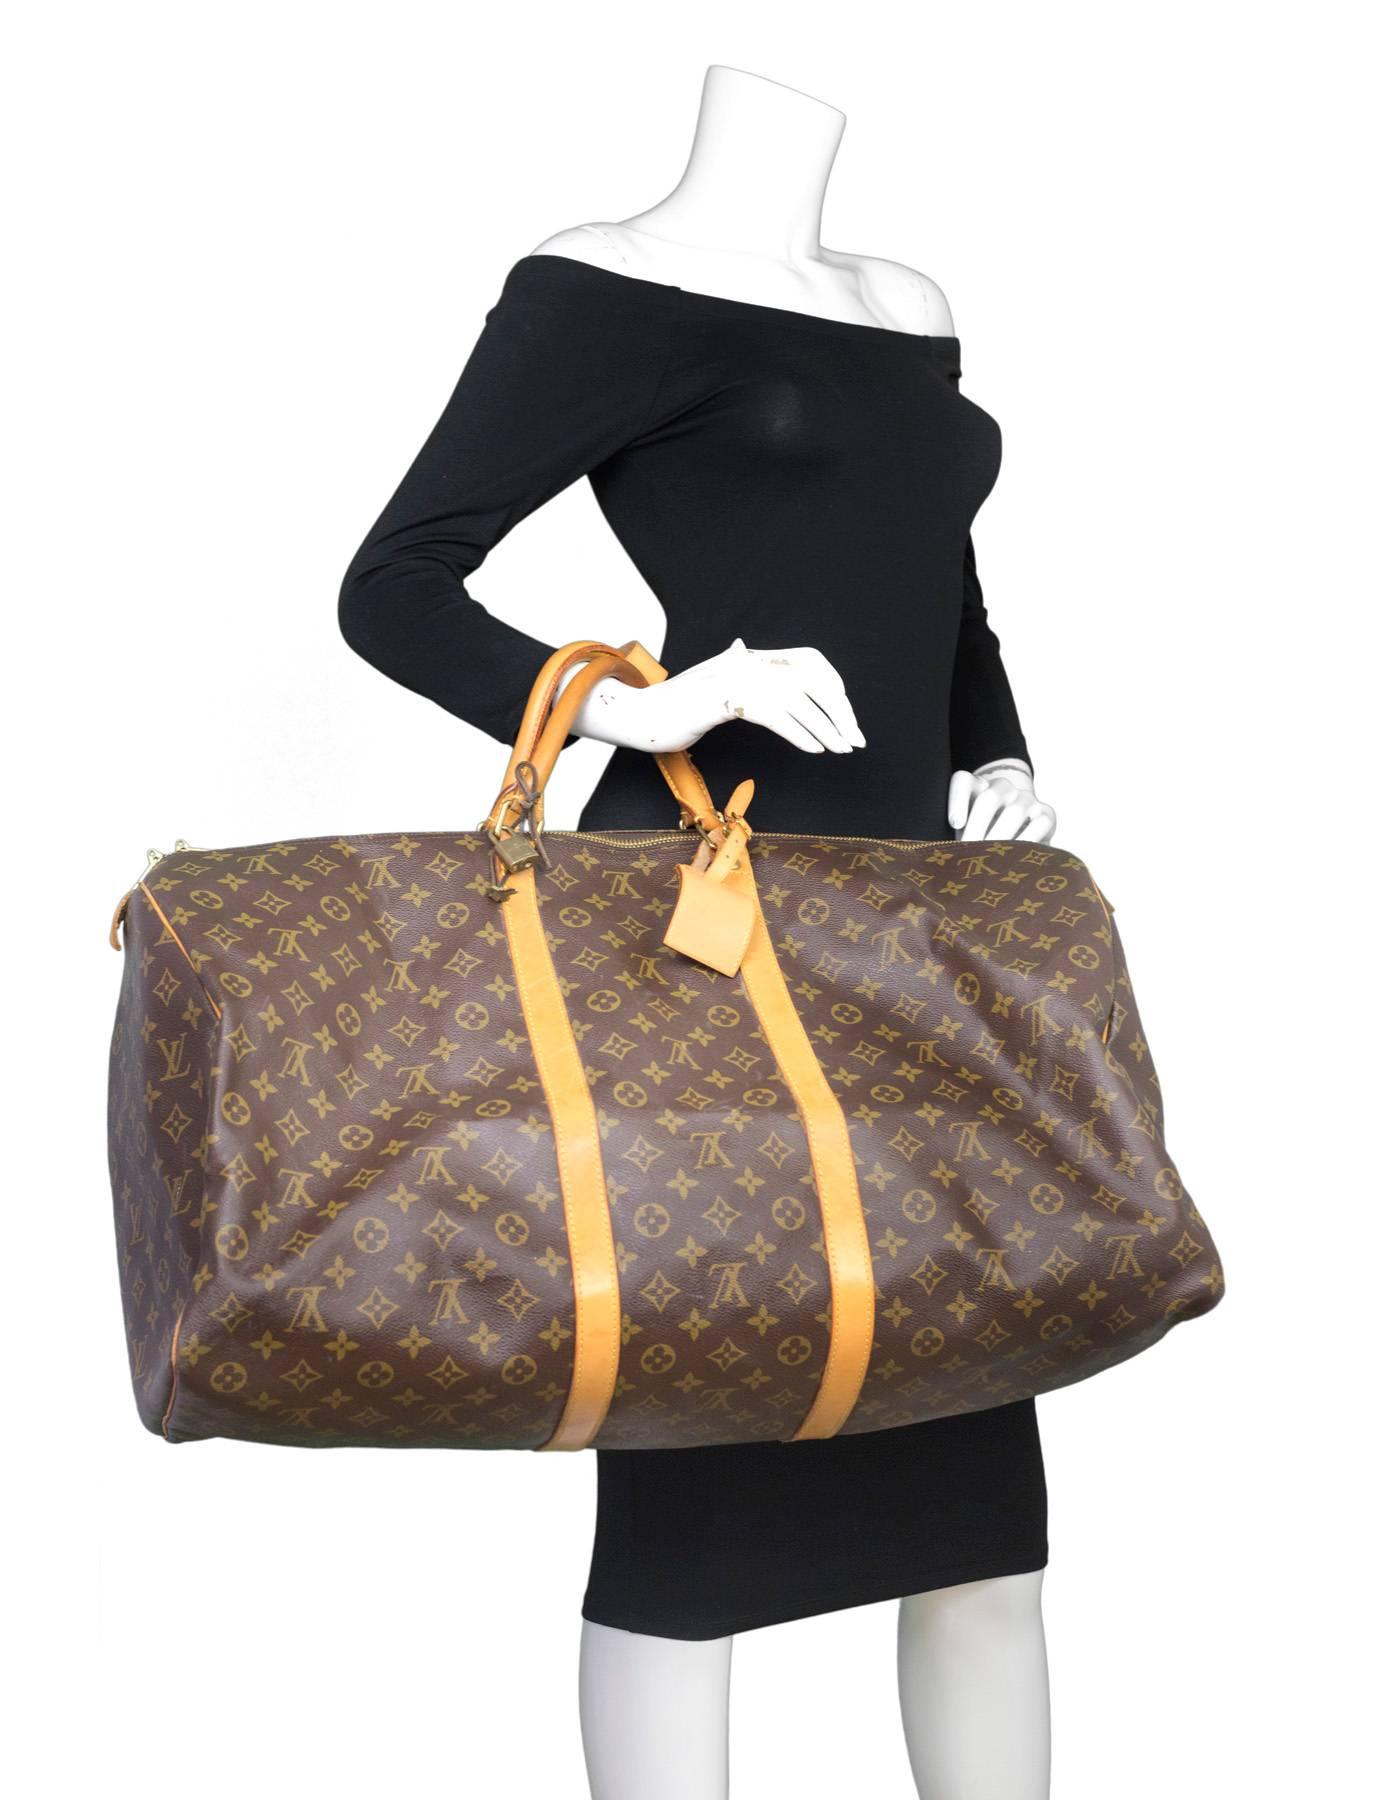 100% Authentic Louis Vuitton Monogram Keepall 60. Features all-over monogram print with aged tan leather handles and brass hardware. Brown textile interior. Comes with lock and luggage tag. Excellent pre-owned condition with the exception of fading